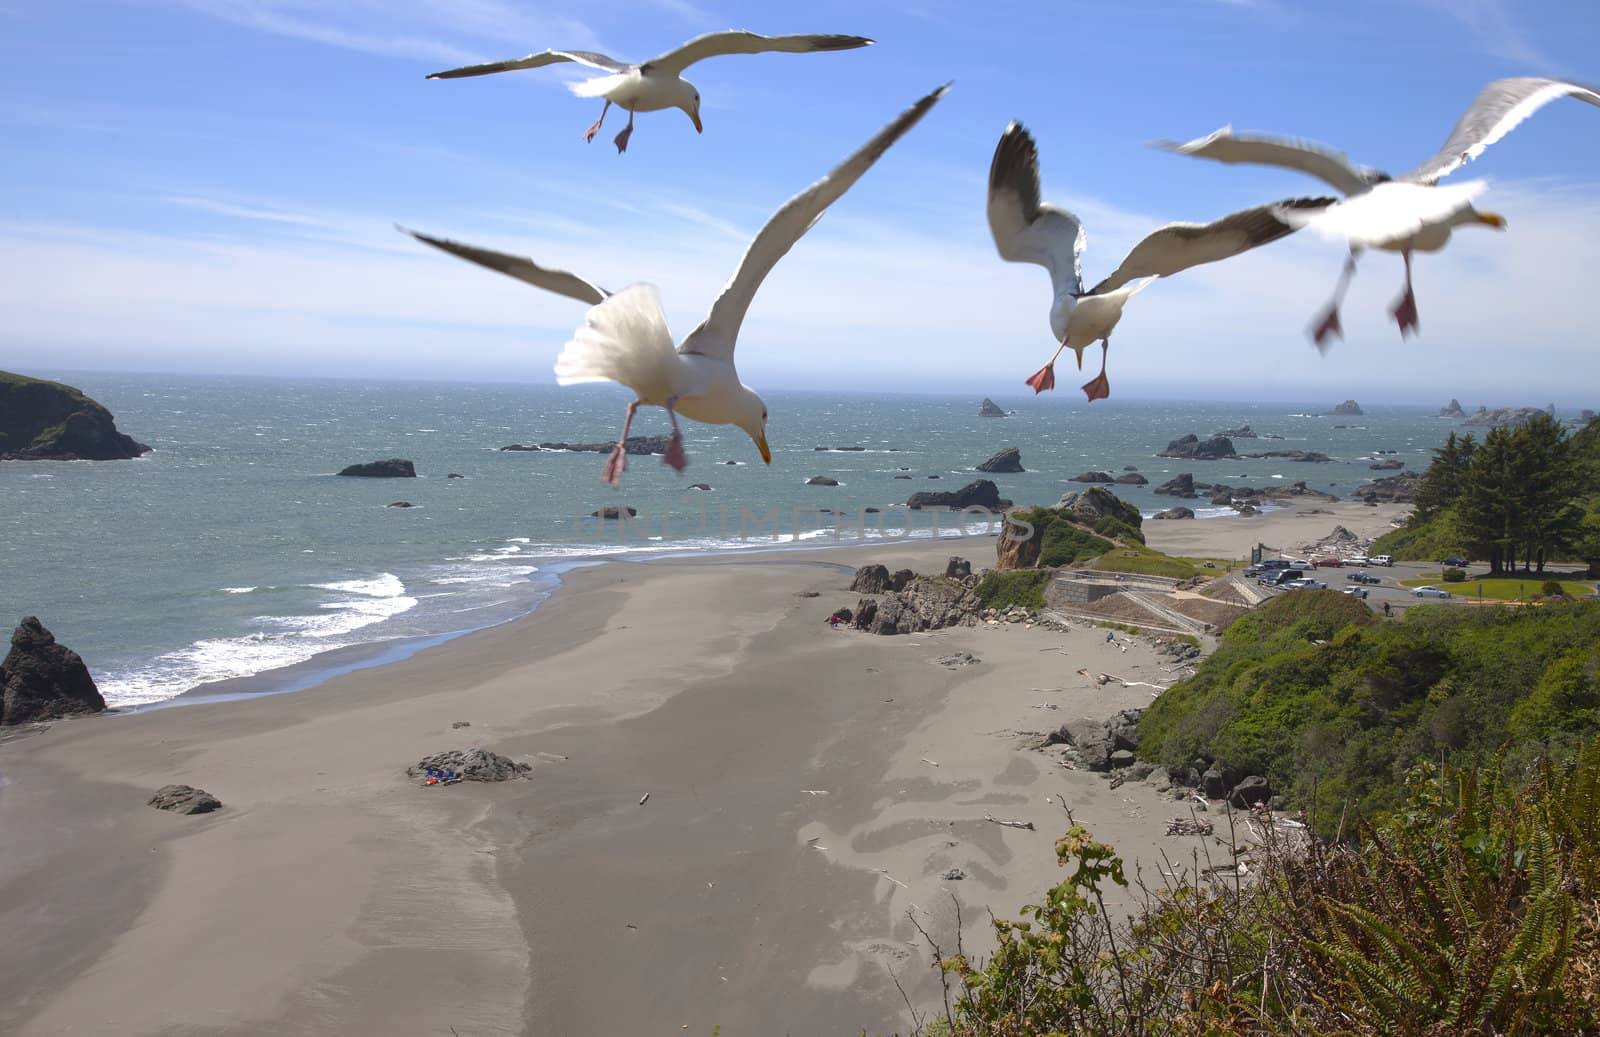 Oregon coast and beaches and seagulls. by Rigucci